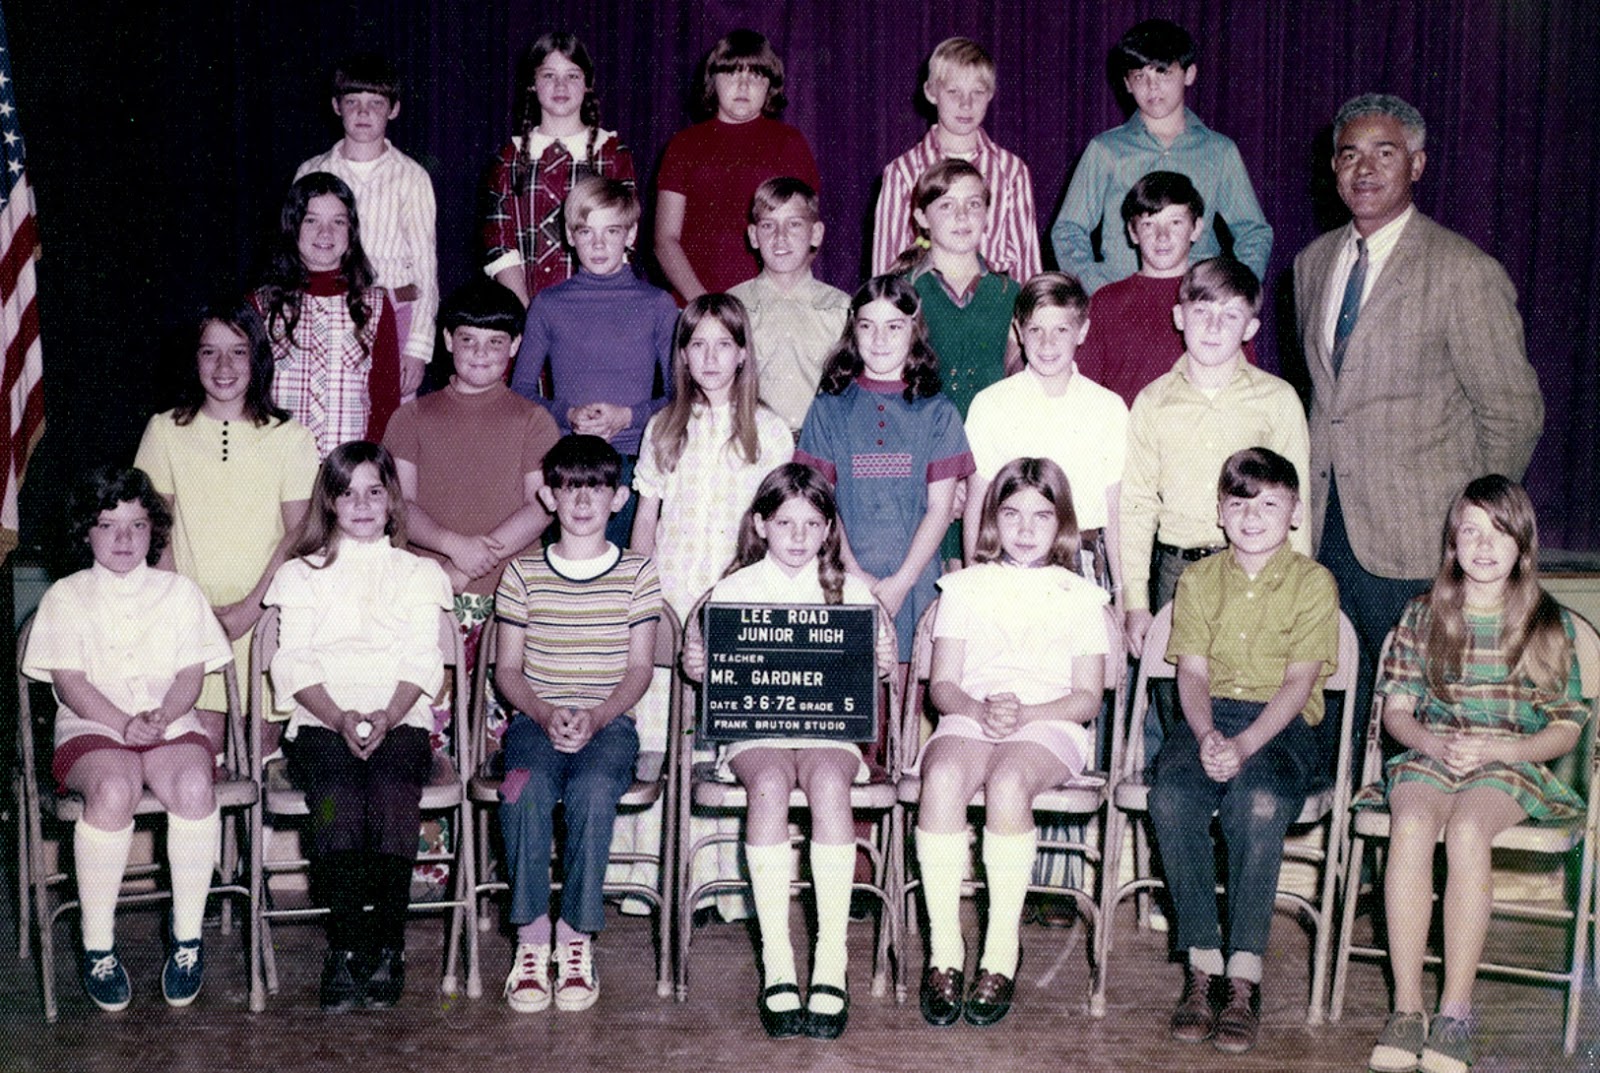 Tammany Family: Lee Road Jr High Class Pictures - 1972